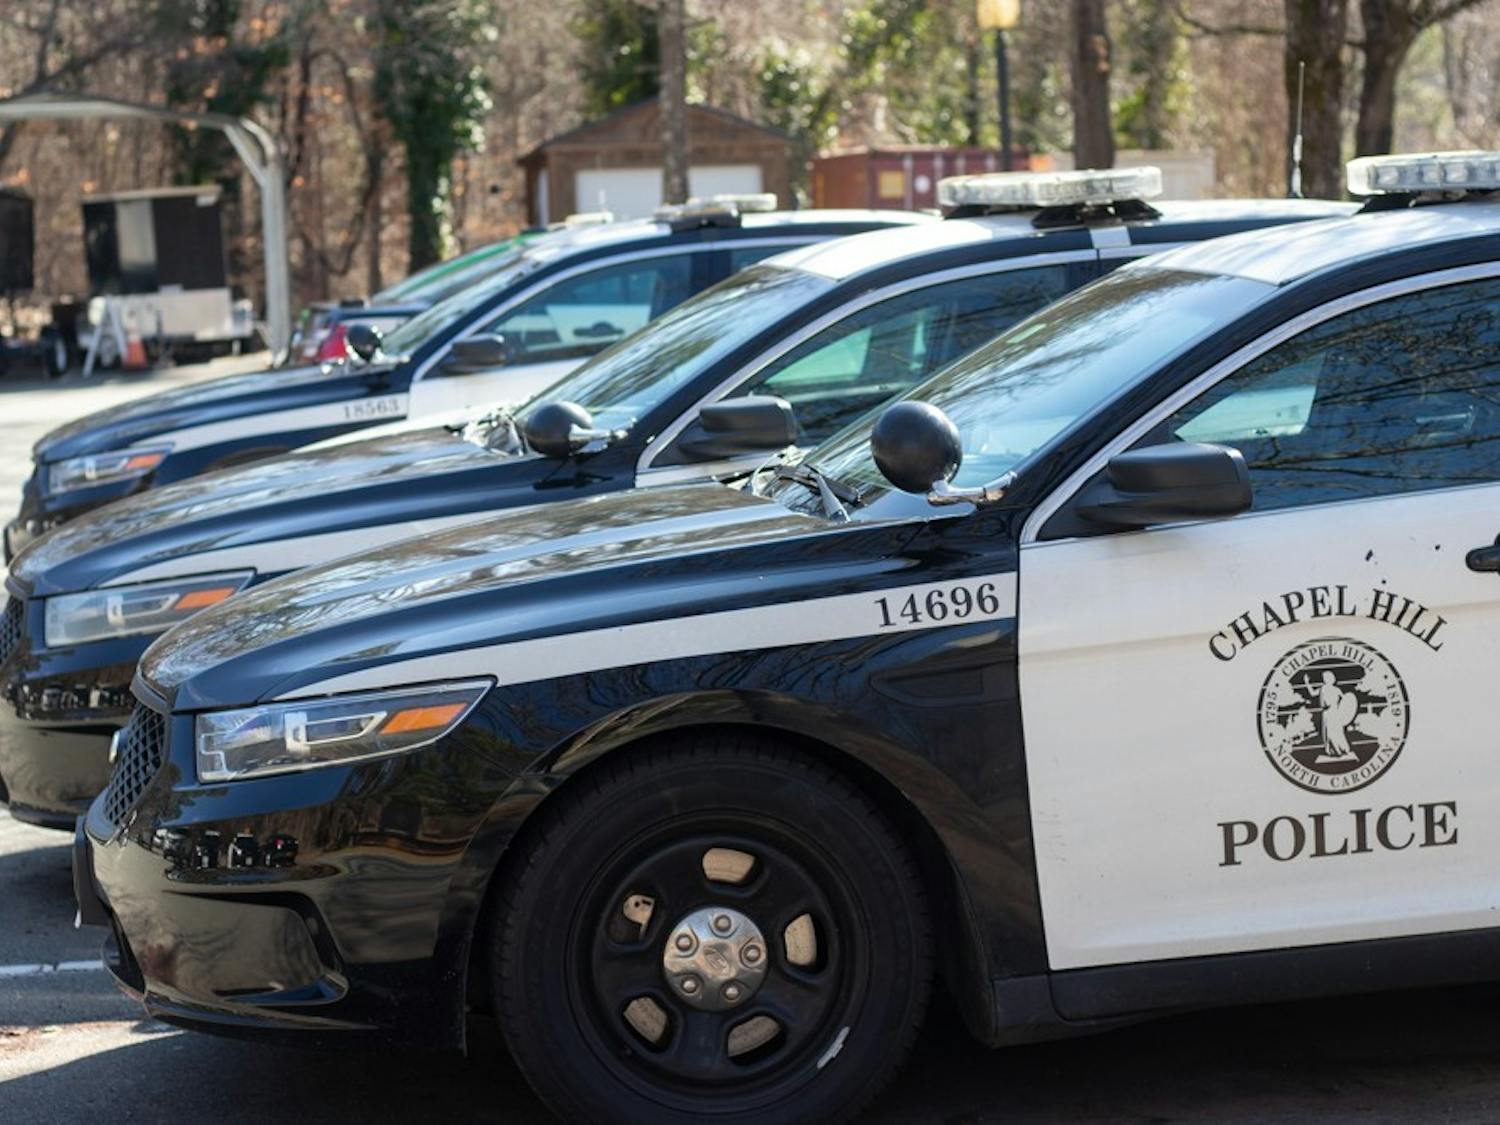 Chapel Hill Police vehicles standby at the Chapel Hill Police Department on Tuesday, Jan. 28, 2020.&nbsp;